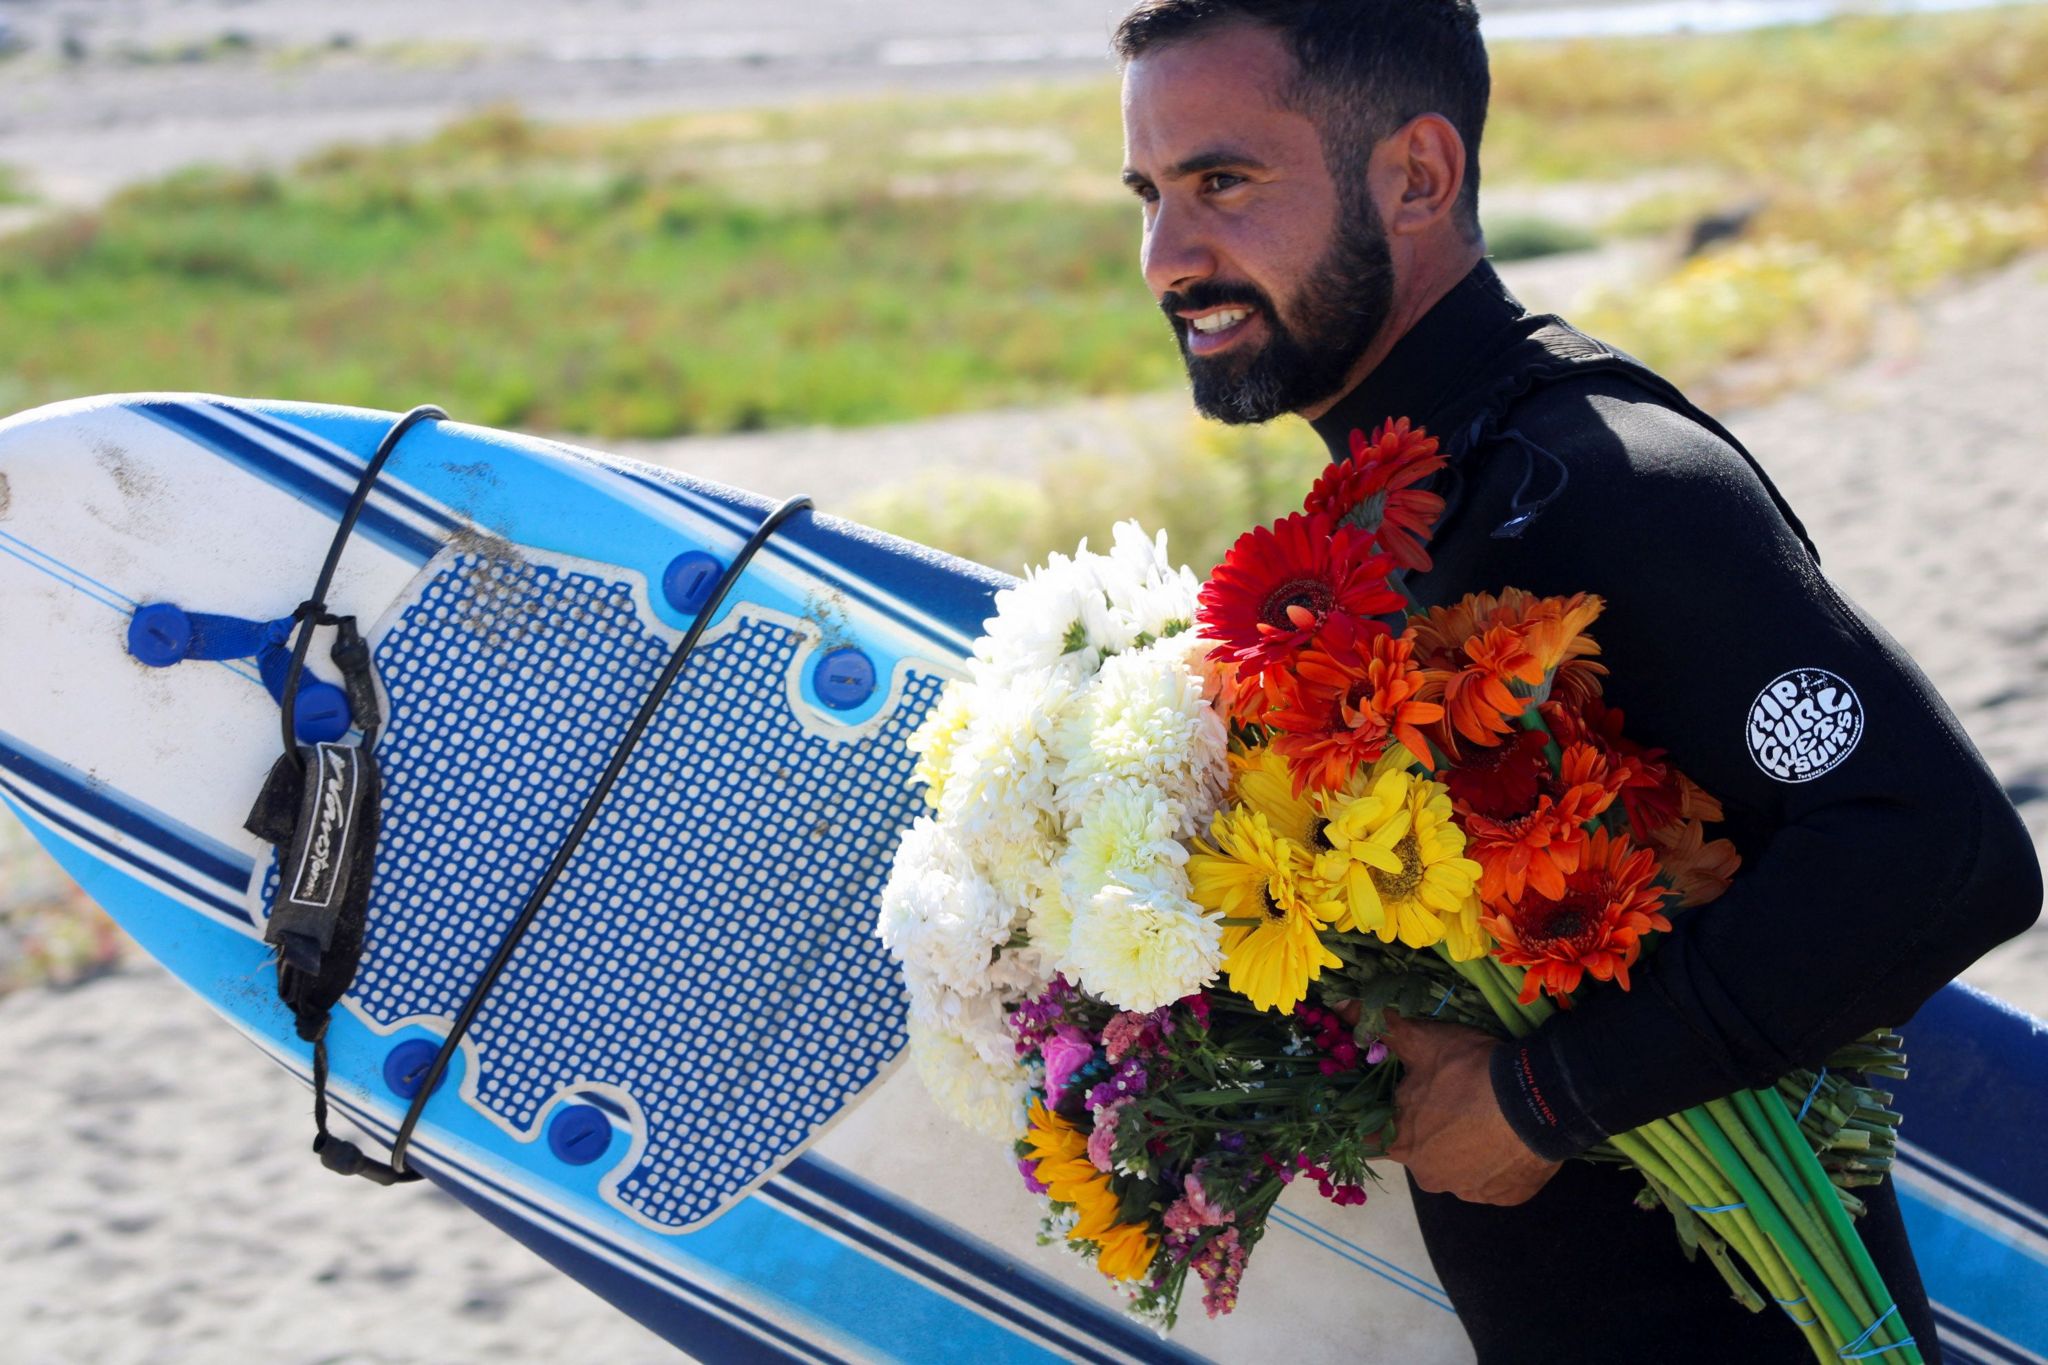 A surfer carries flowers with a surf board